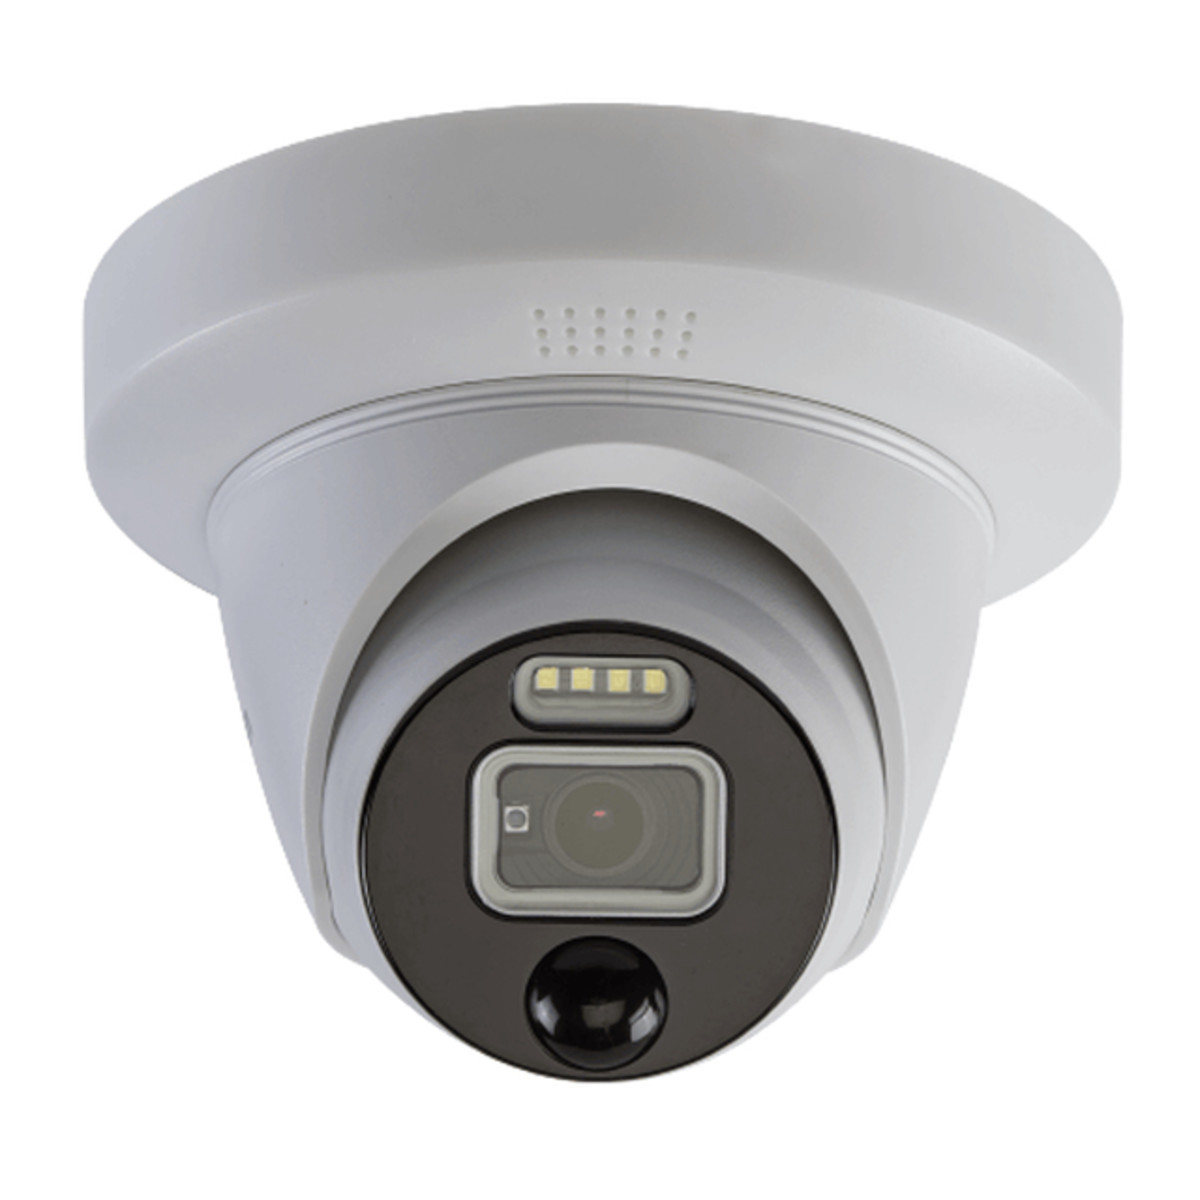 EUK - 1080p Dome Enforcer Analog Cam